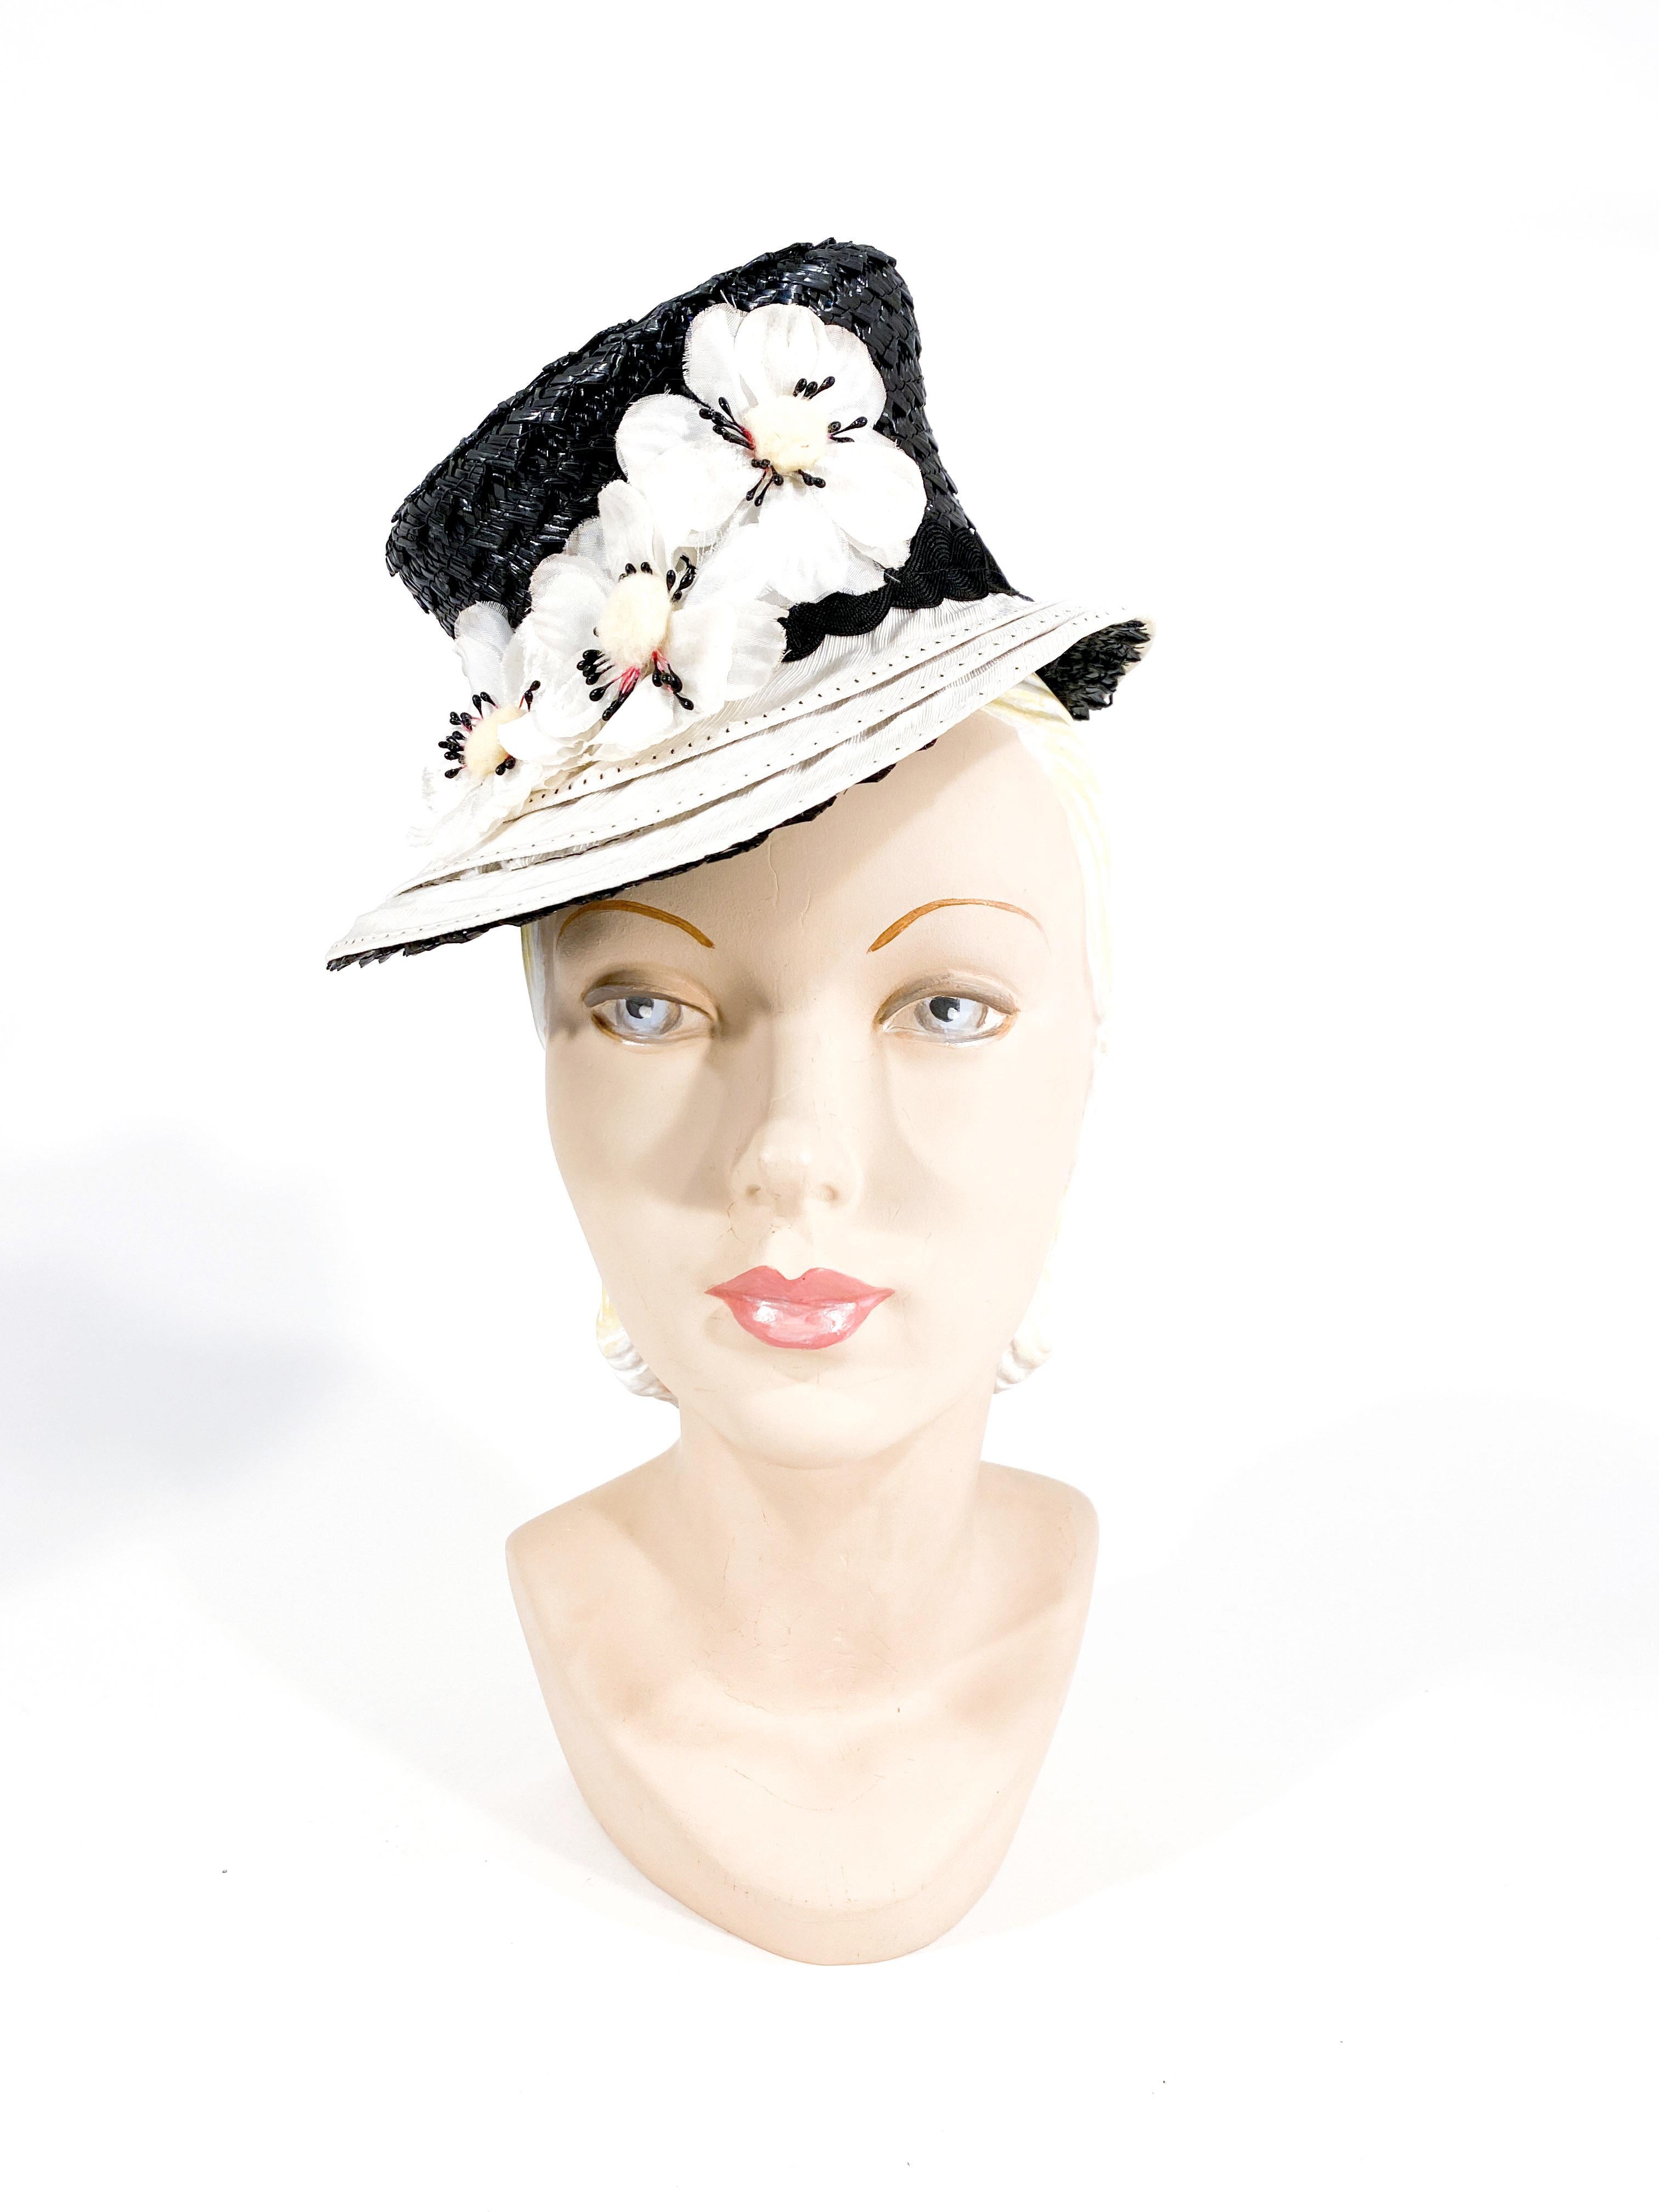 1930s Art Deco black coated woven straw hat with 3 layers of off-white twill rows on the brim accented with black top stitching. The band of this hat has two intertwined bric-brac trimmings accented with white velvet and silk flowers. The interior